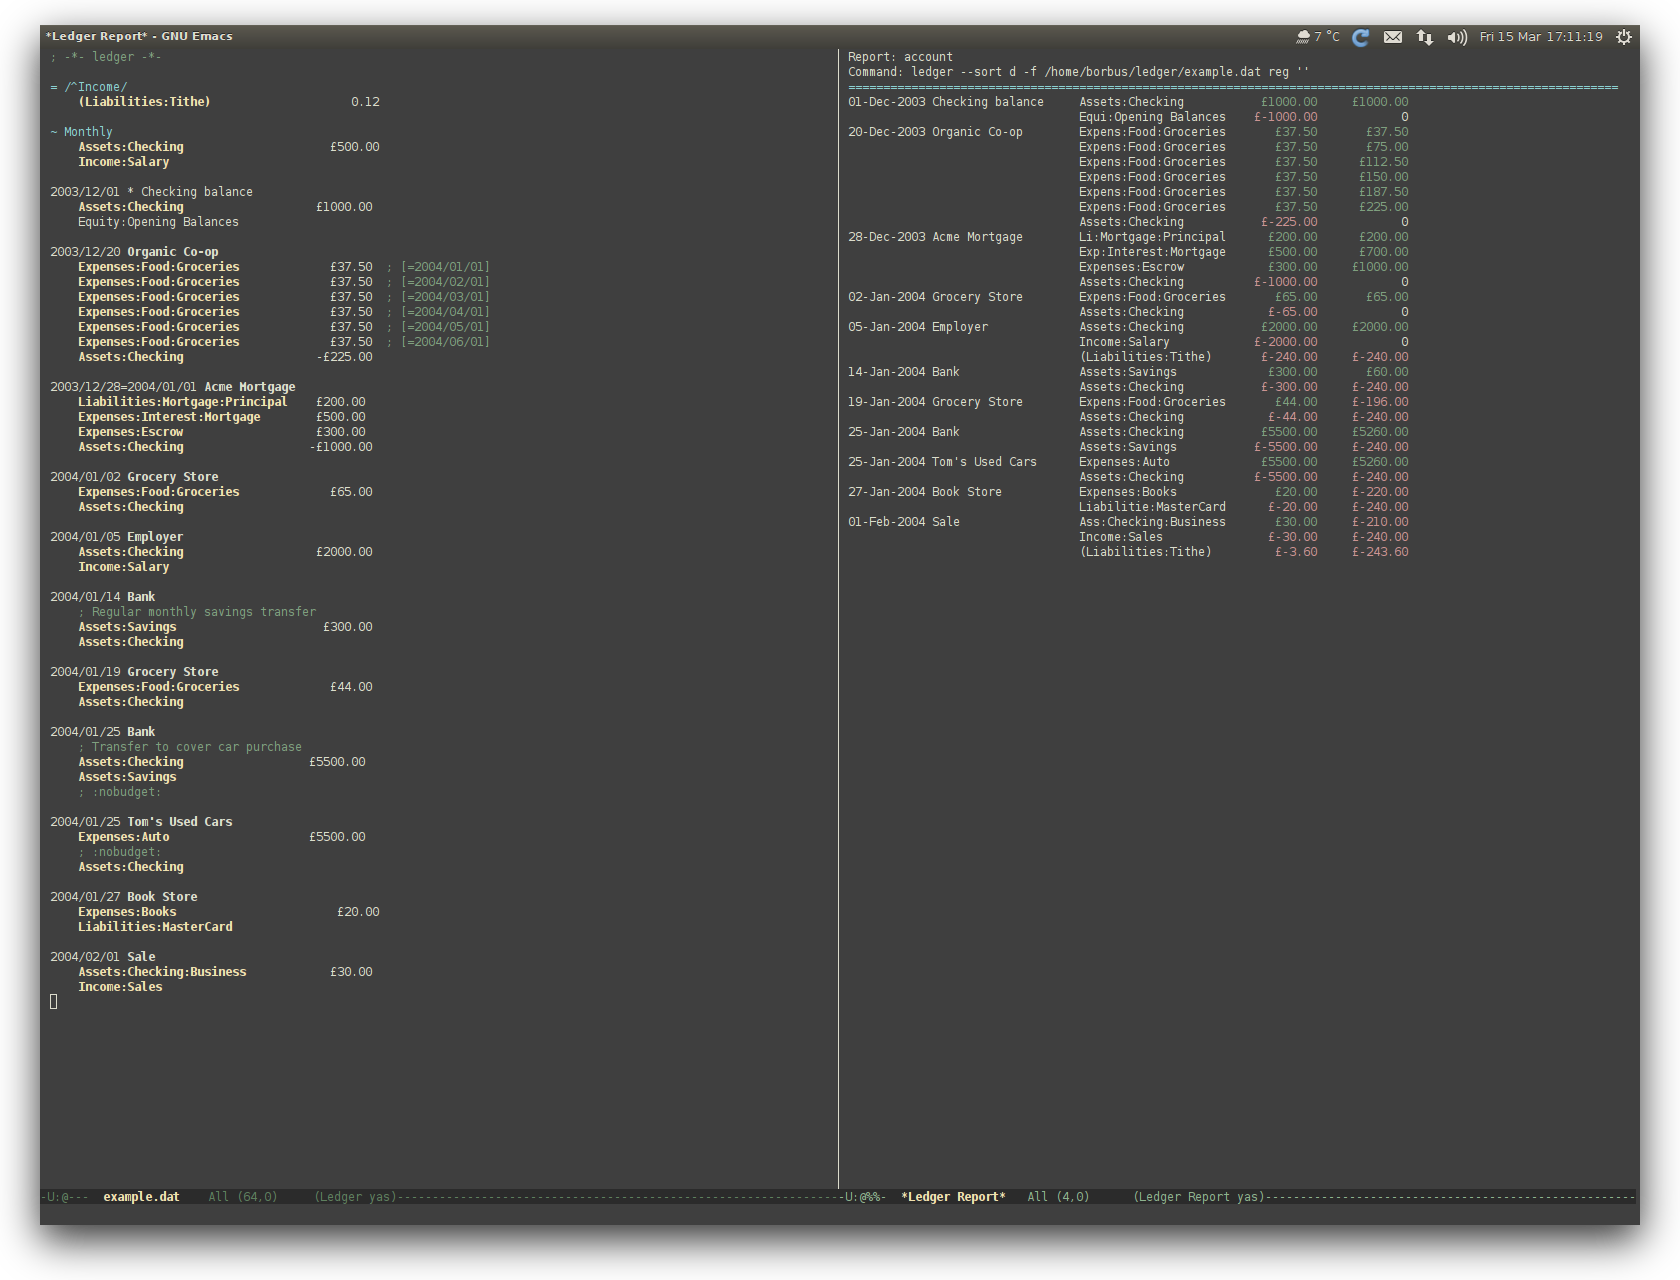 /TakeV/spacemacs/media/commit/e8d3ecee0e59797c1ffbe3788841cbb0718c71d9/layers/finance/img/ledger.png